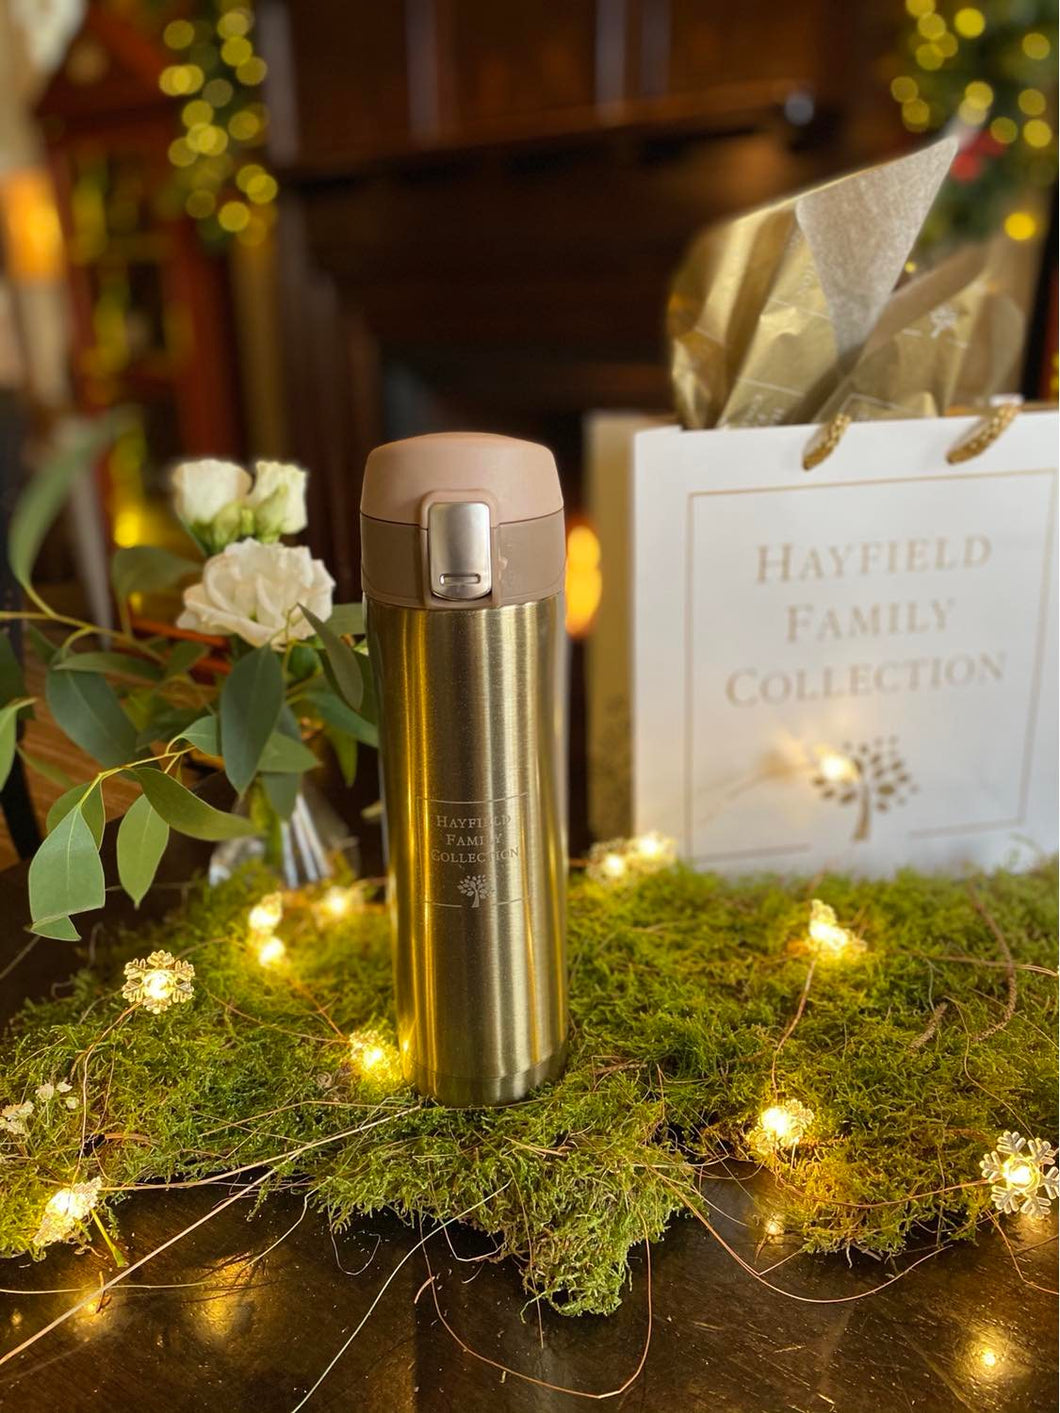 Hayfield Family Collection Coffee Flask